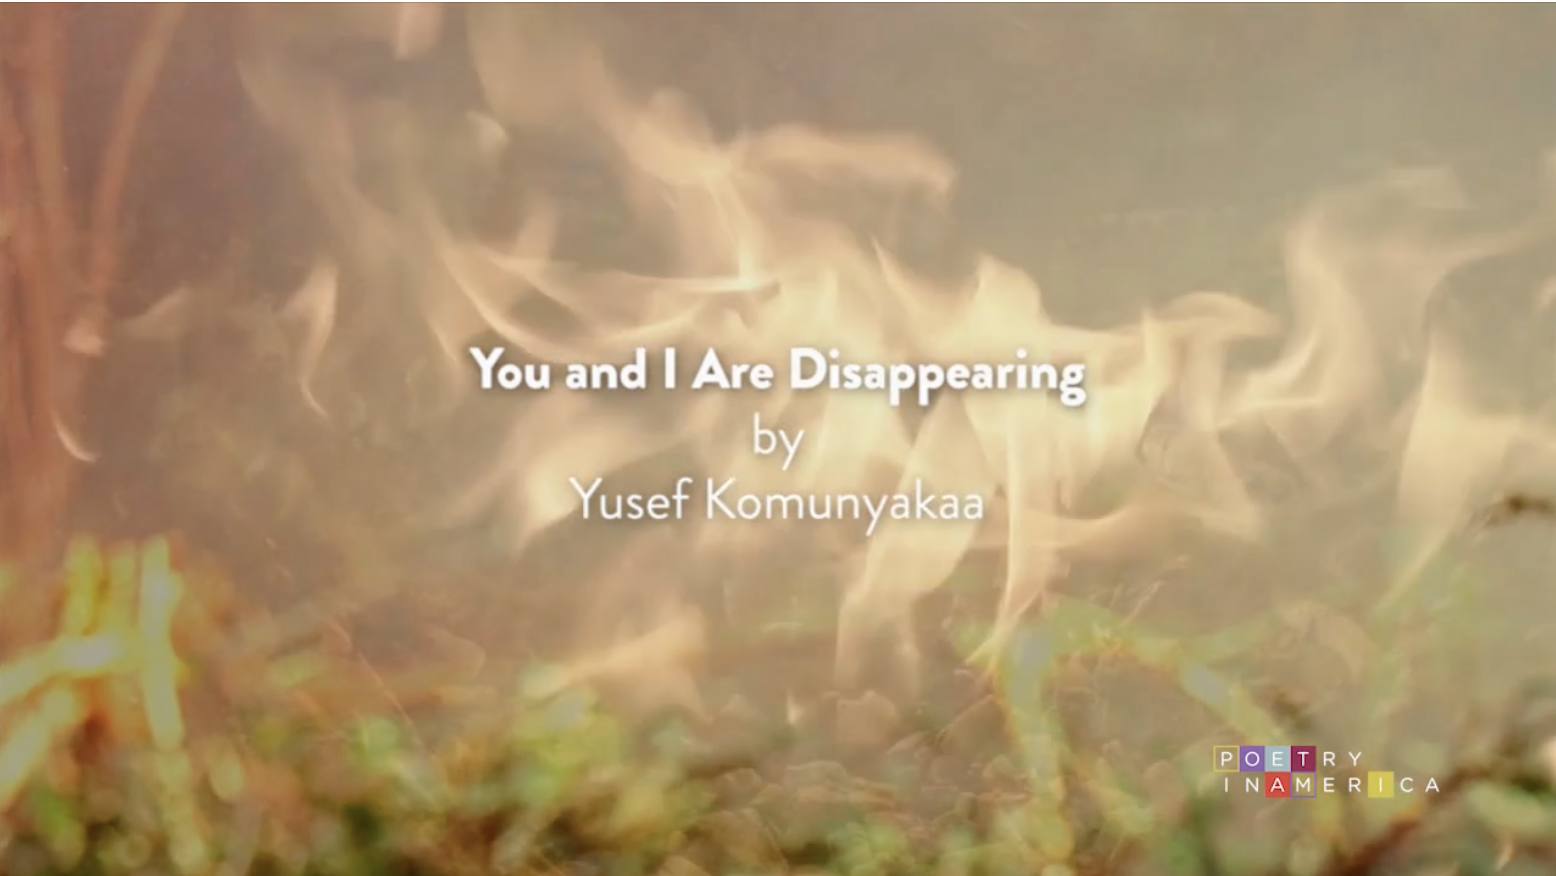 "'You and I Are Disappearing' by Yusef Komunyakaa," with fire in the background.